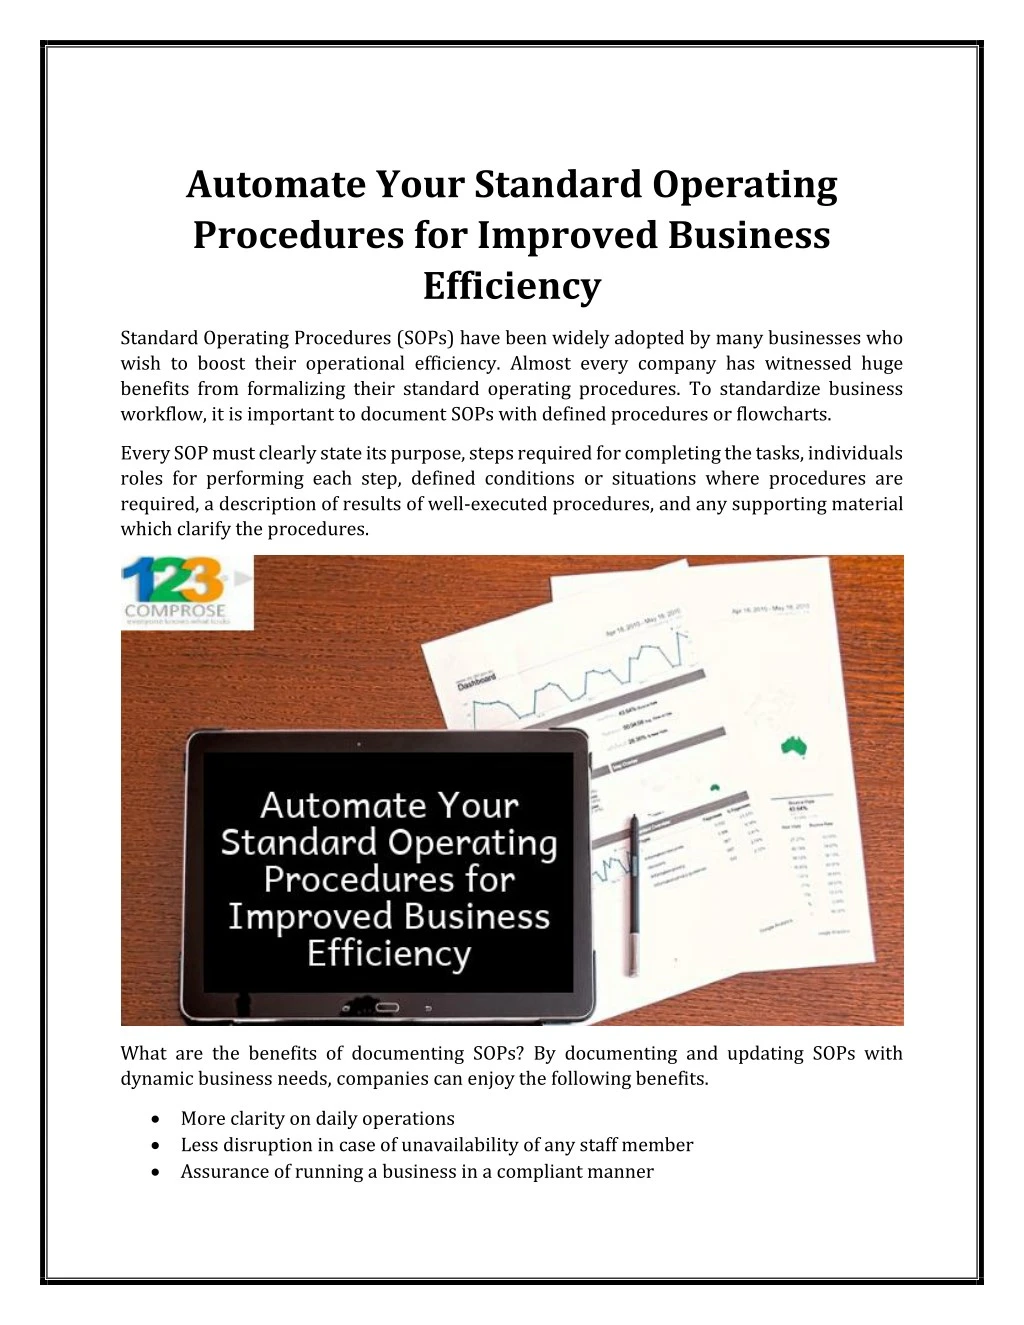 automate your standard operating procedures